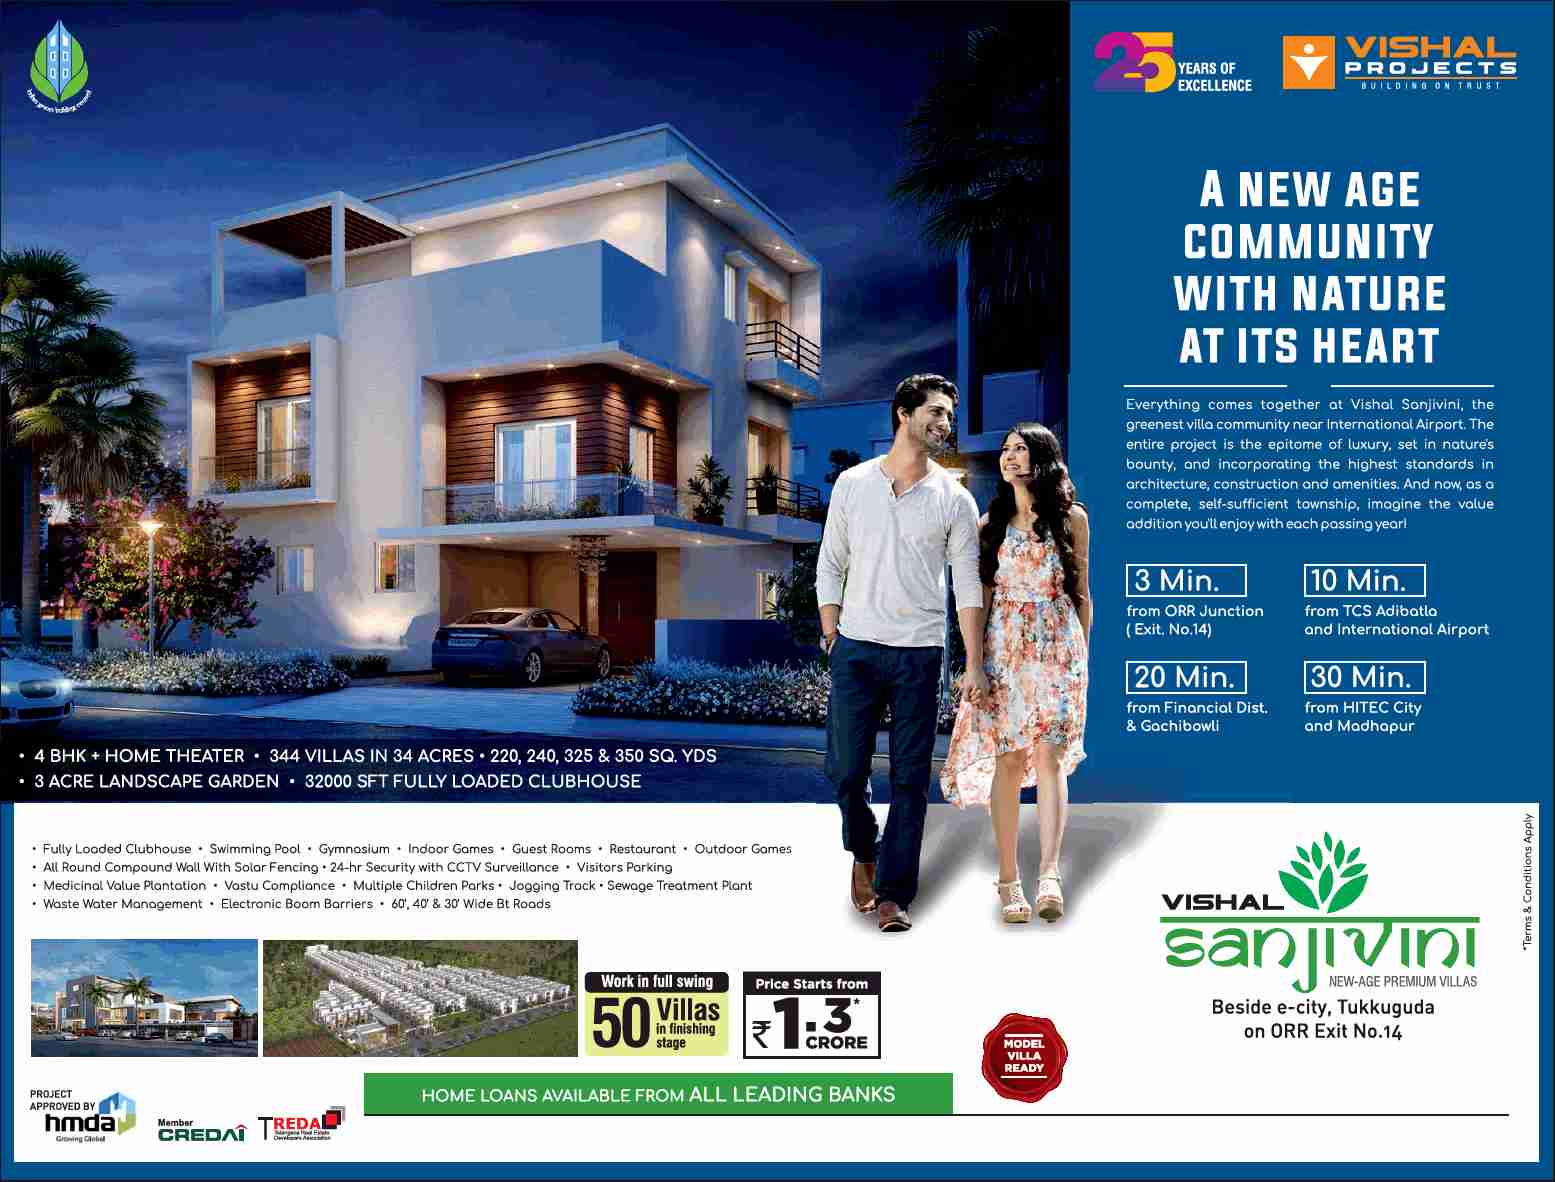 Live in a new age community with nature at its heart at Vishal Sanjivini in Hyderabad Update